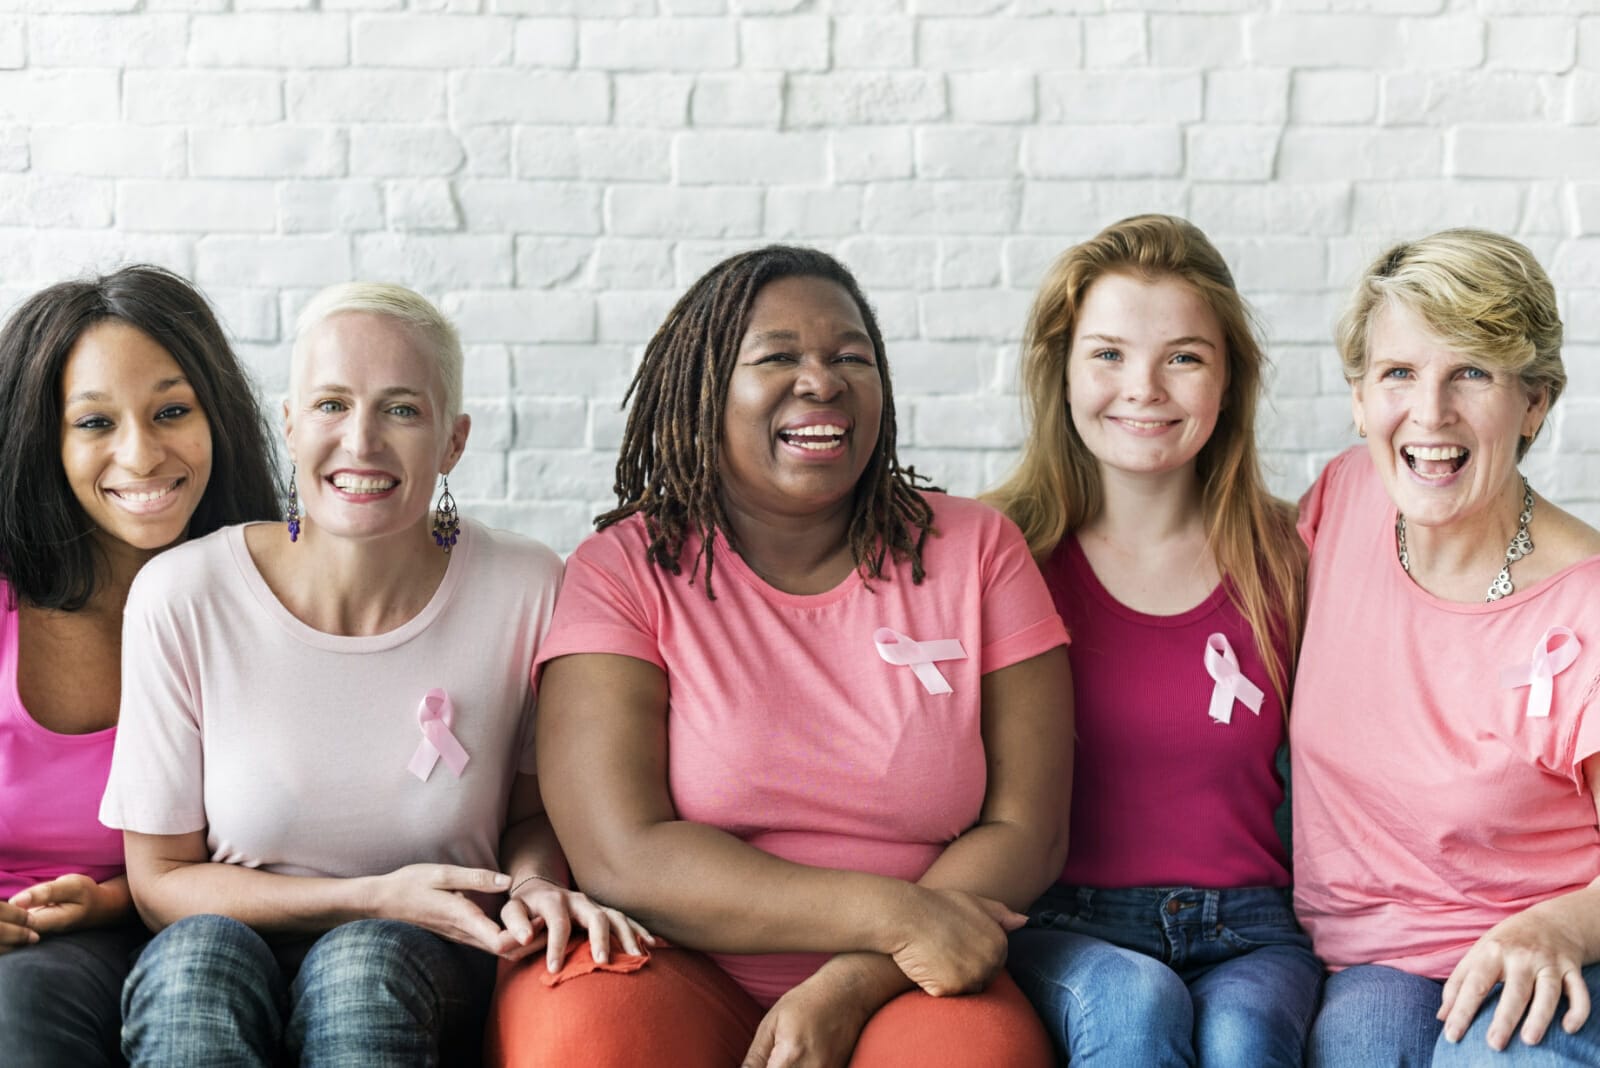 Breast Health: The Importance of Early Detection & Screening